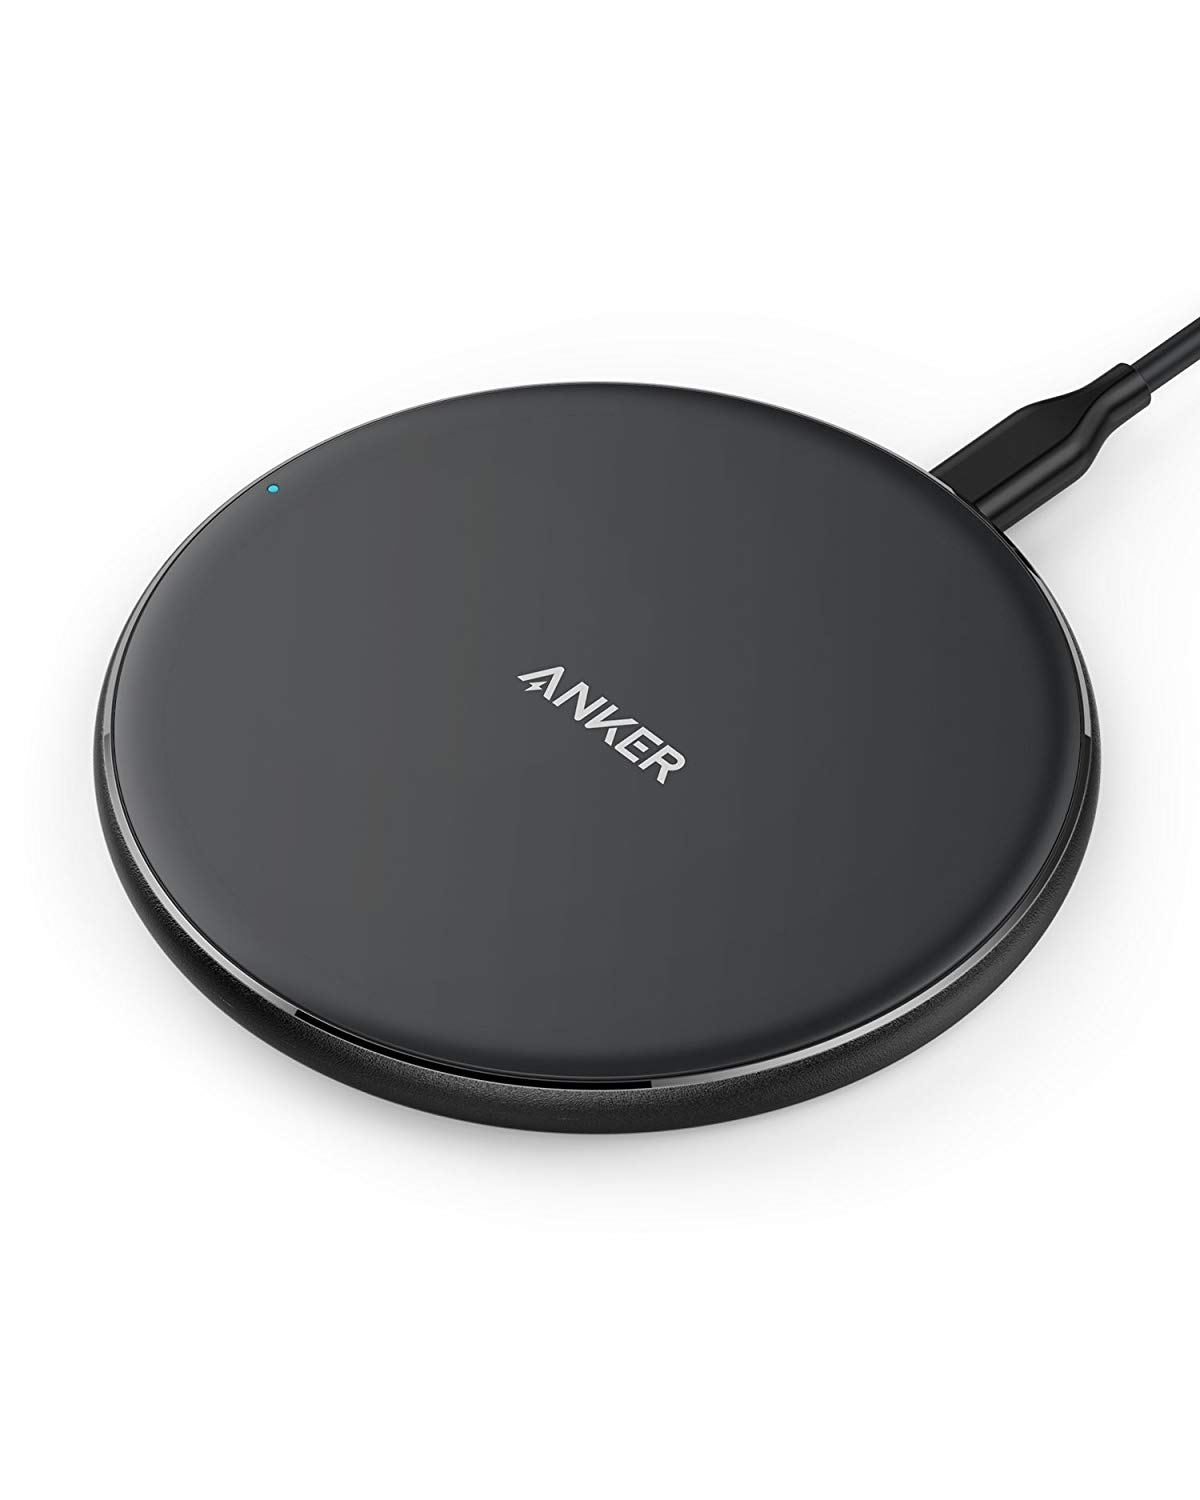 Anker Qi-Certified Ultra-Slim Wireless Charger is 30% off (Photo via Amazon)